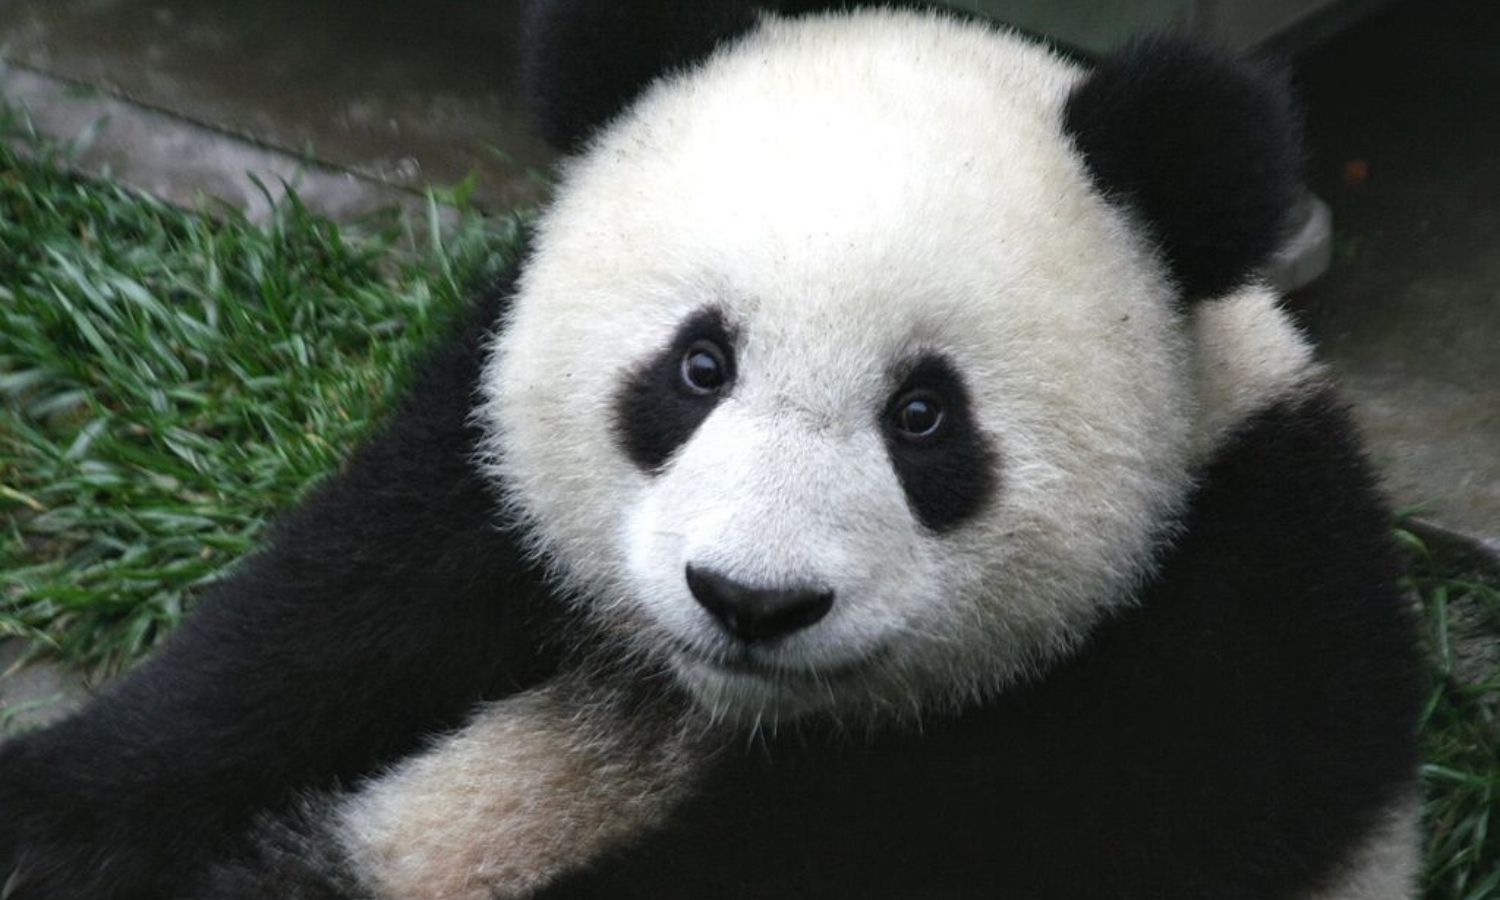 OTD in 1869: The existence of the giant panda became known to the Western world after French Armand David received a giant panda's skin from a hunter.